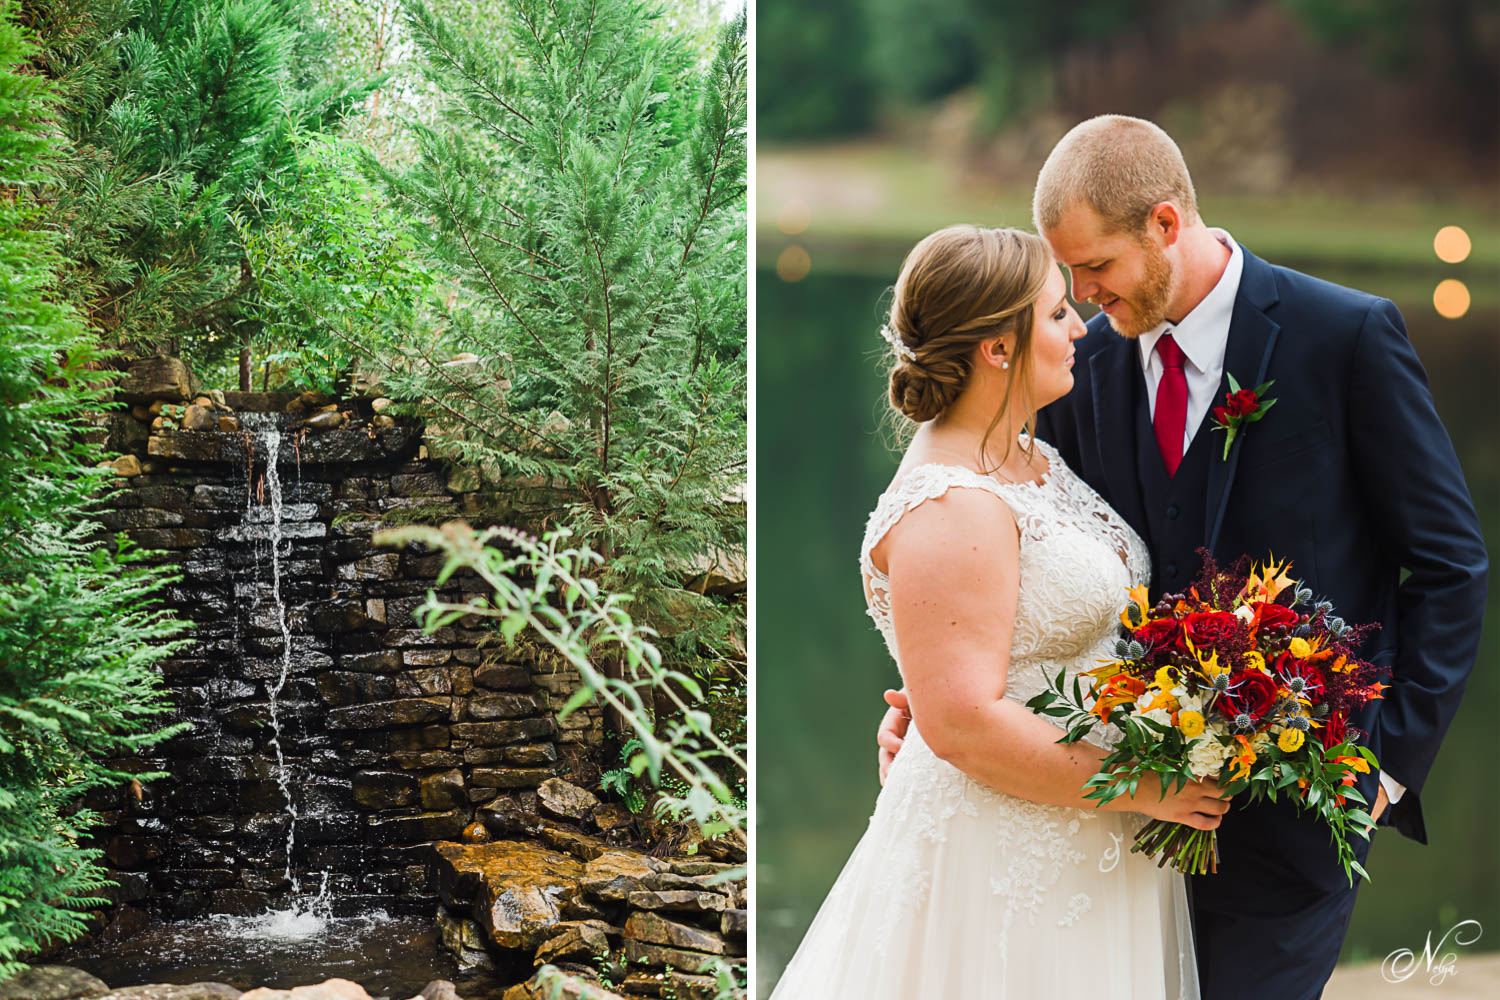 little water falls at Indigo falls in Dallas GA. And bride and groomforhead to forehead smiling at each other.